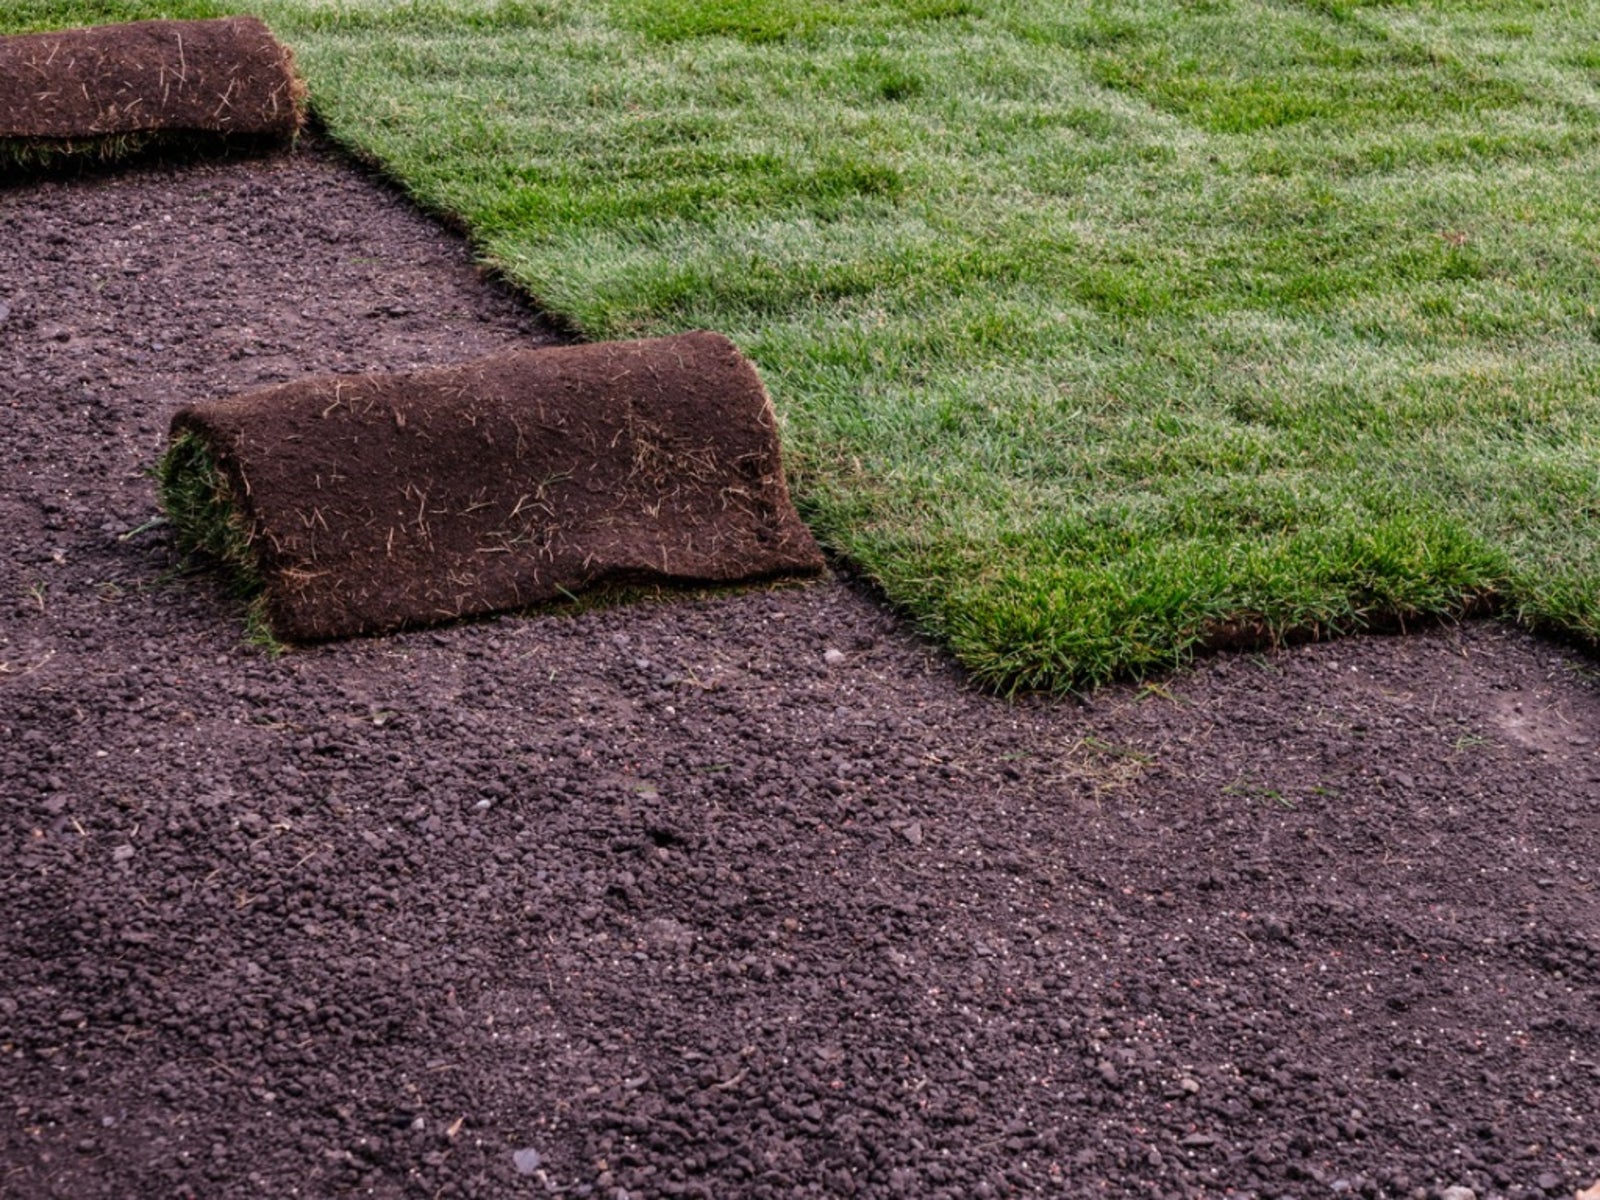 What Are The Important Things For Laying The Sod?